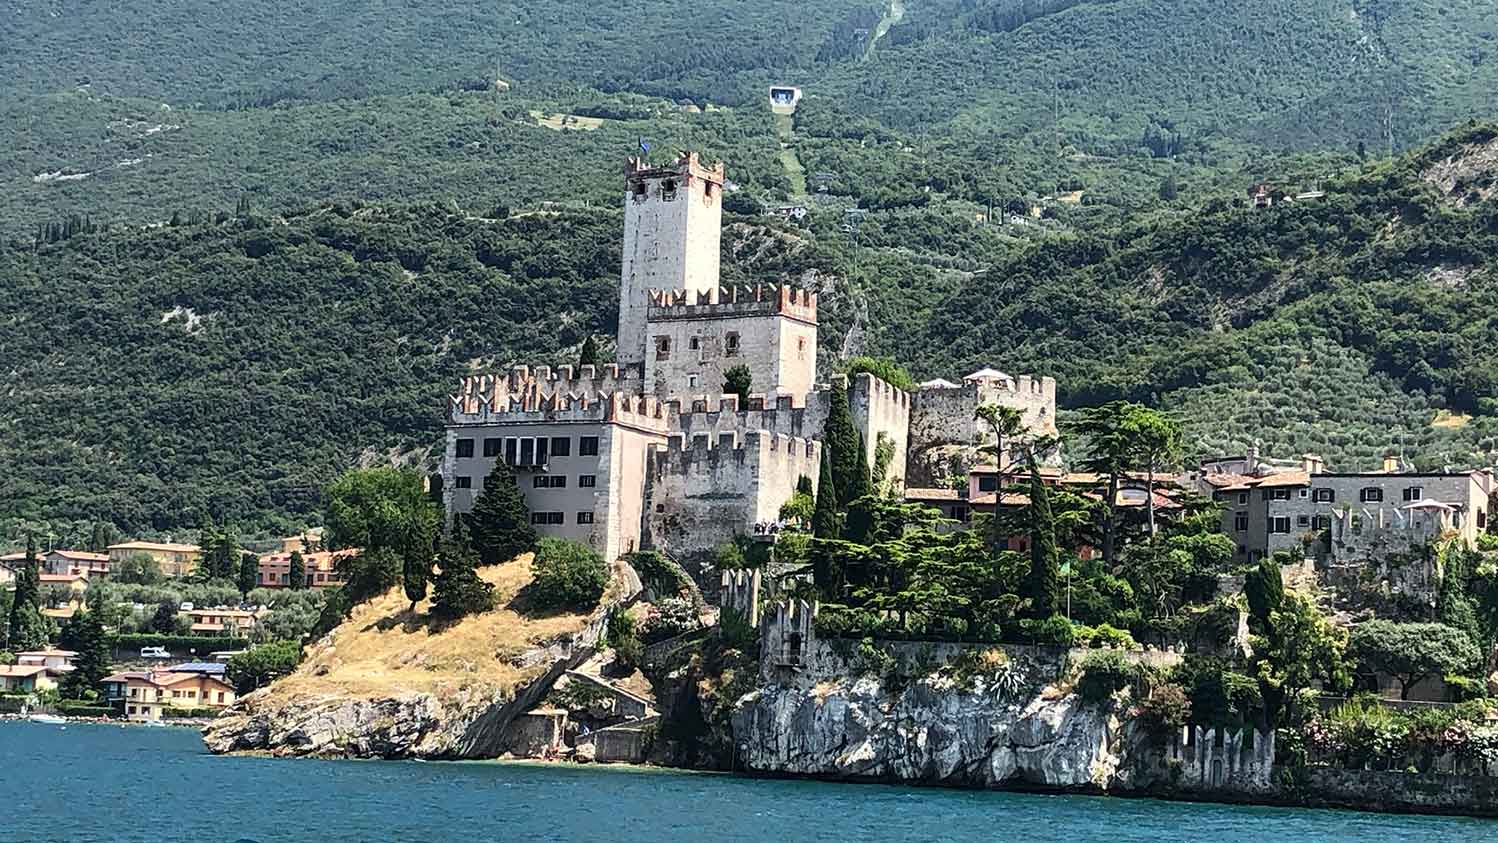 View Malcesine Lake Garda Italy from ferry